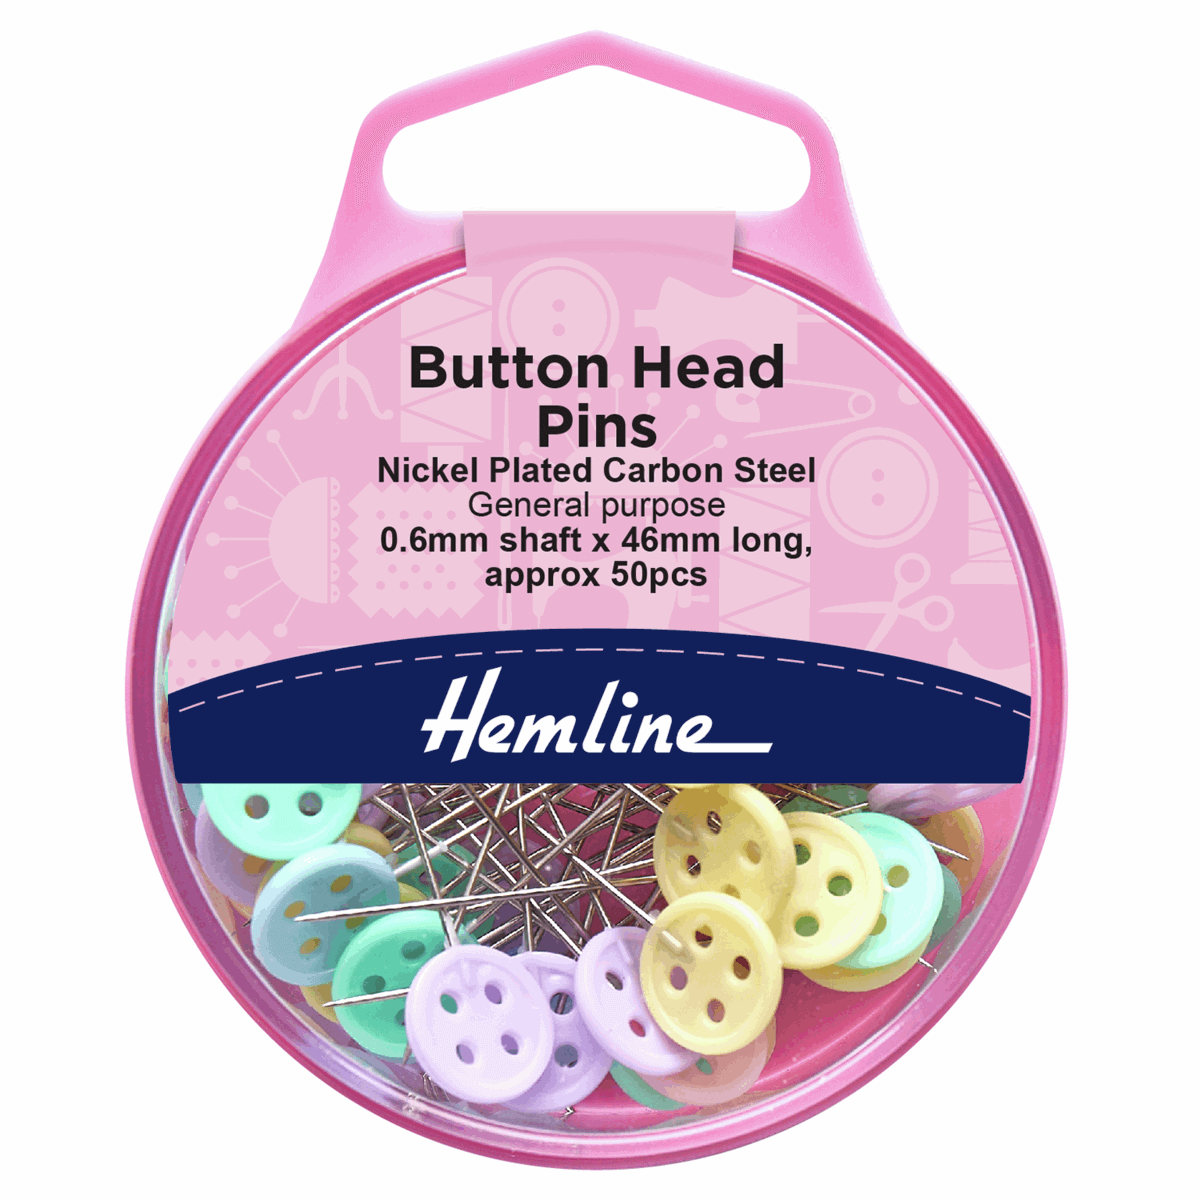 50 Button headed sewing pins in reusable storage box. Hemline. 46 mm x 0.6 mm